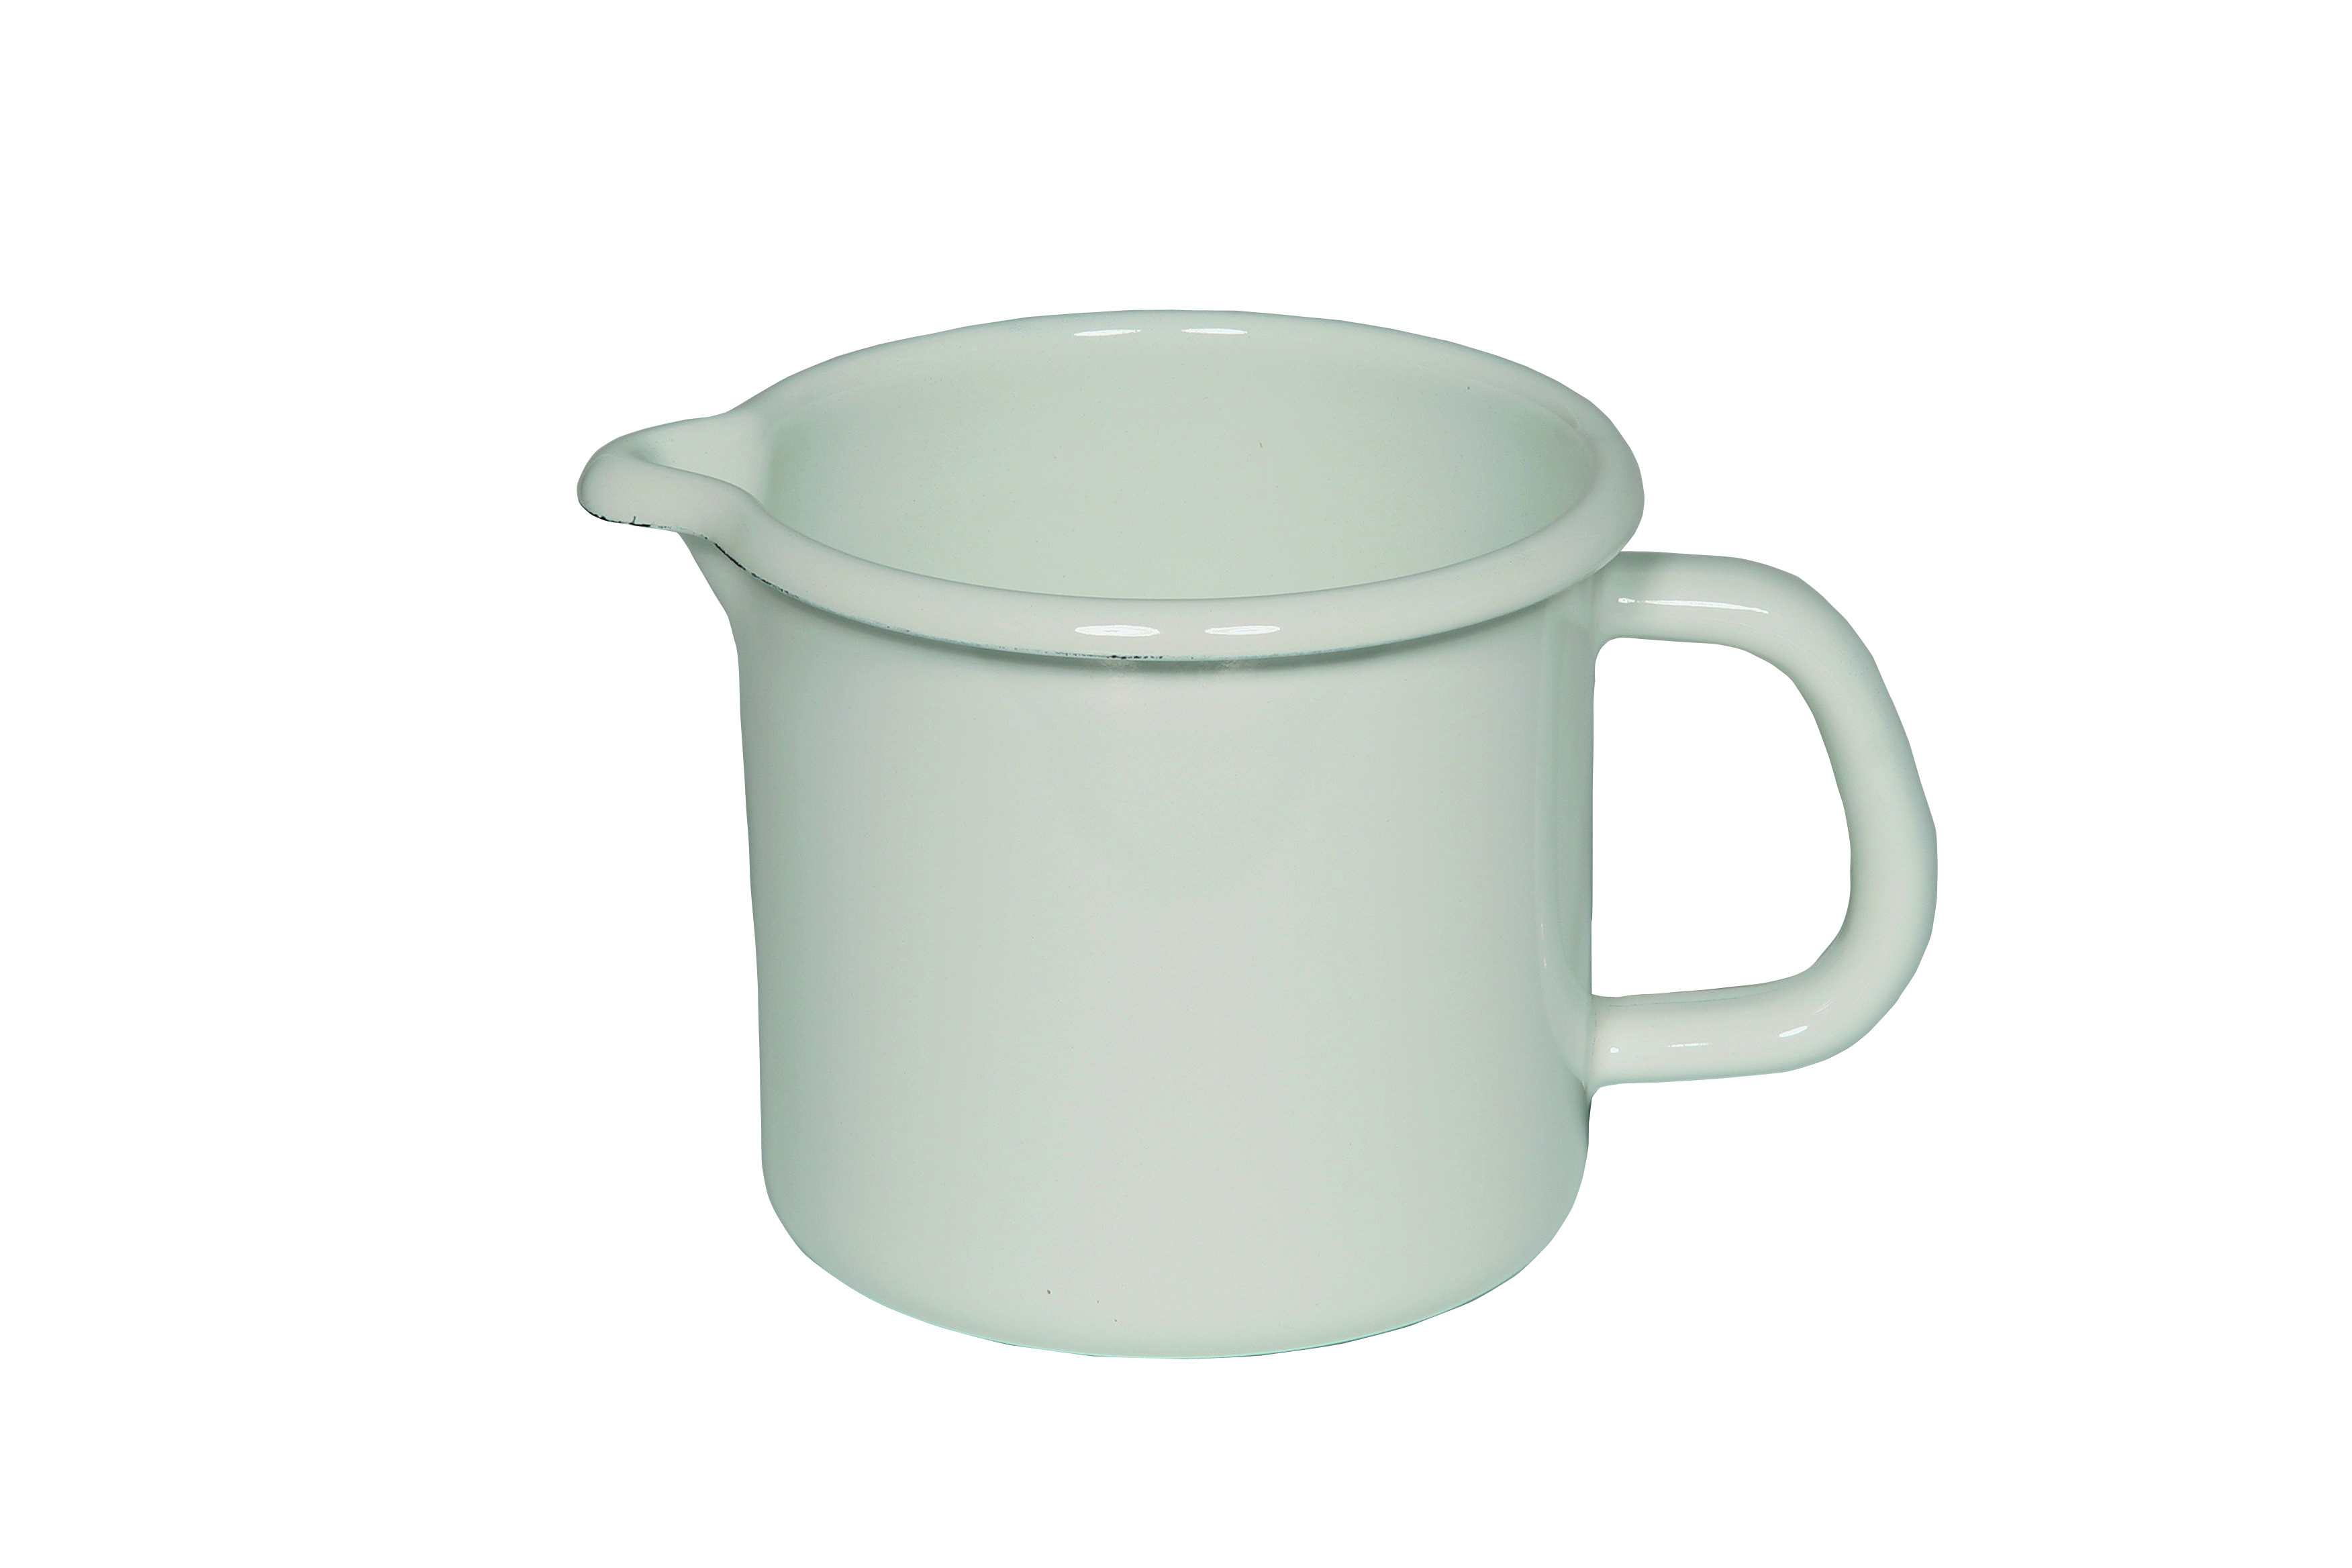 Riess Classic Weiß Schnabeltopf 12 cm / 1,0 Ltr / aus Emaille